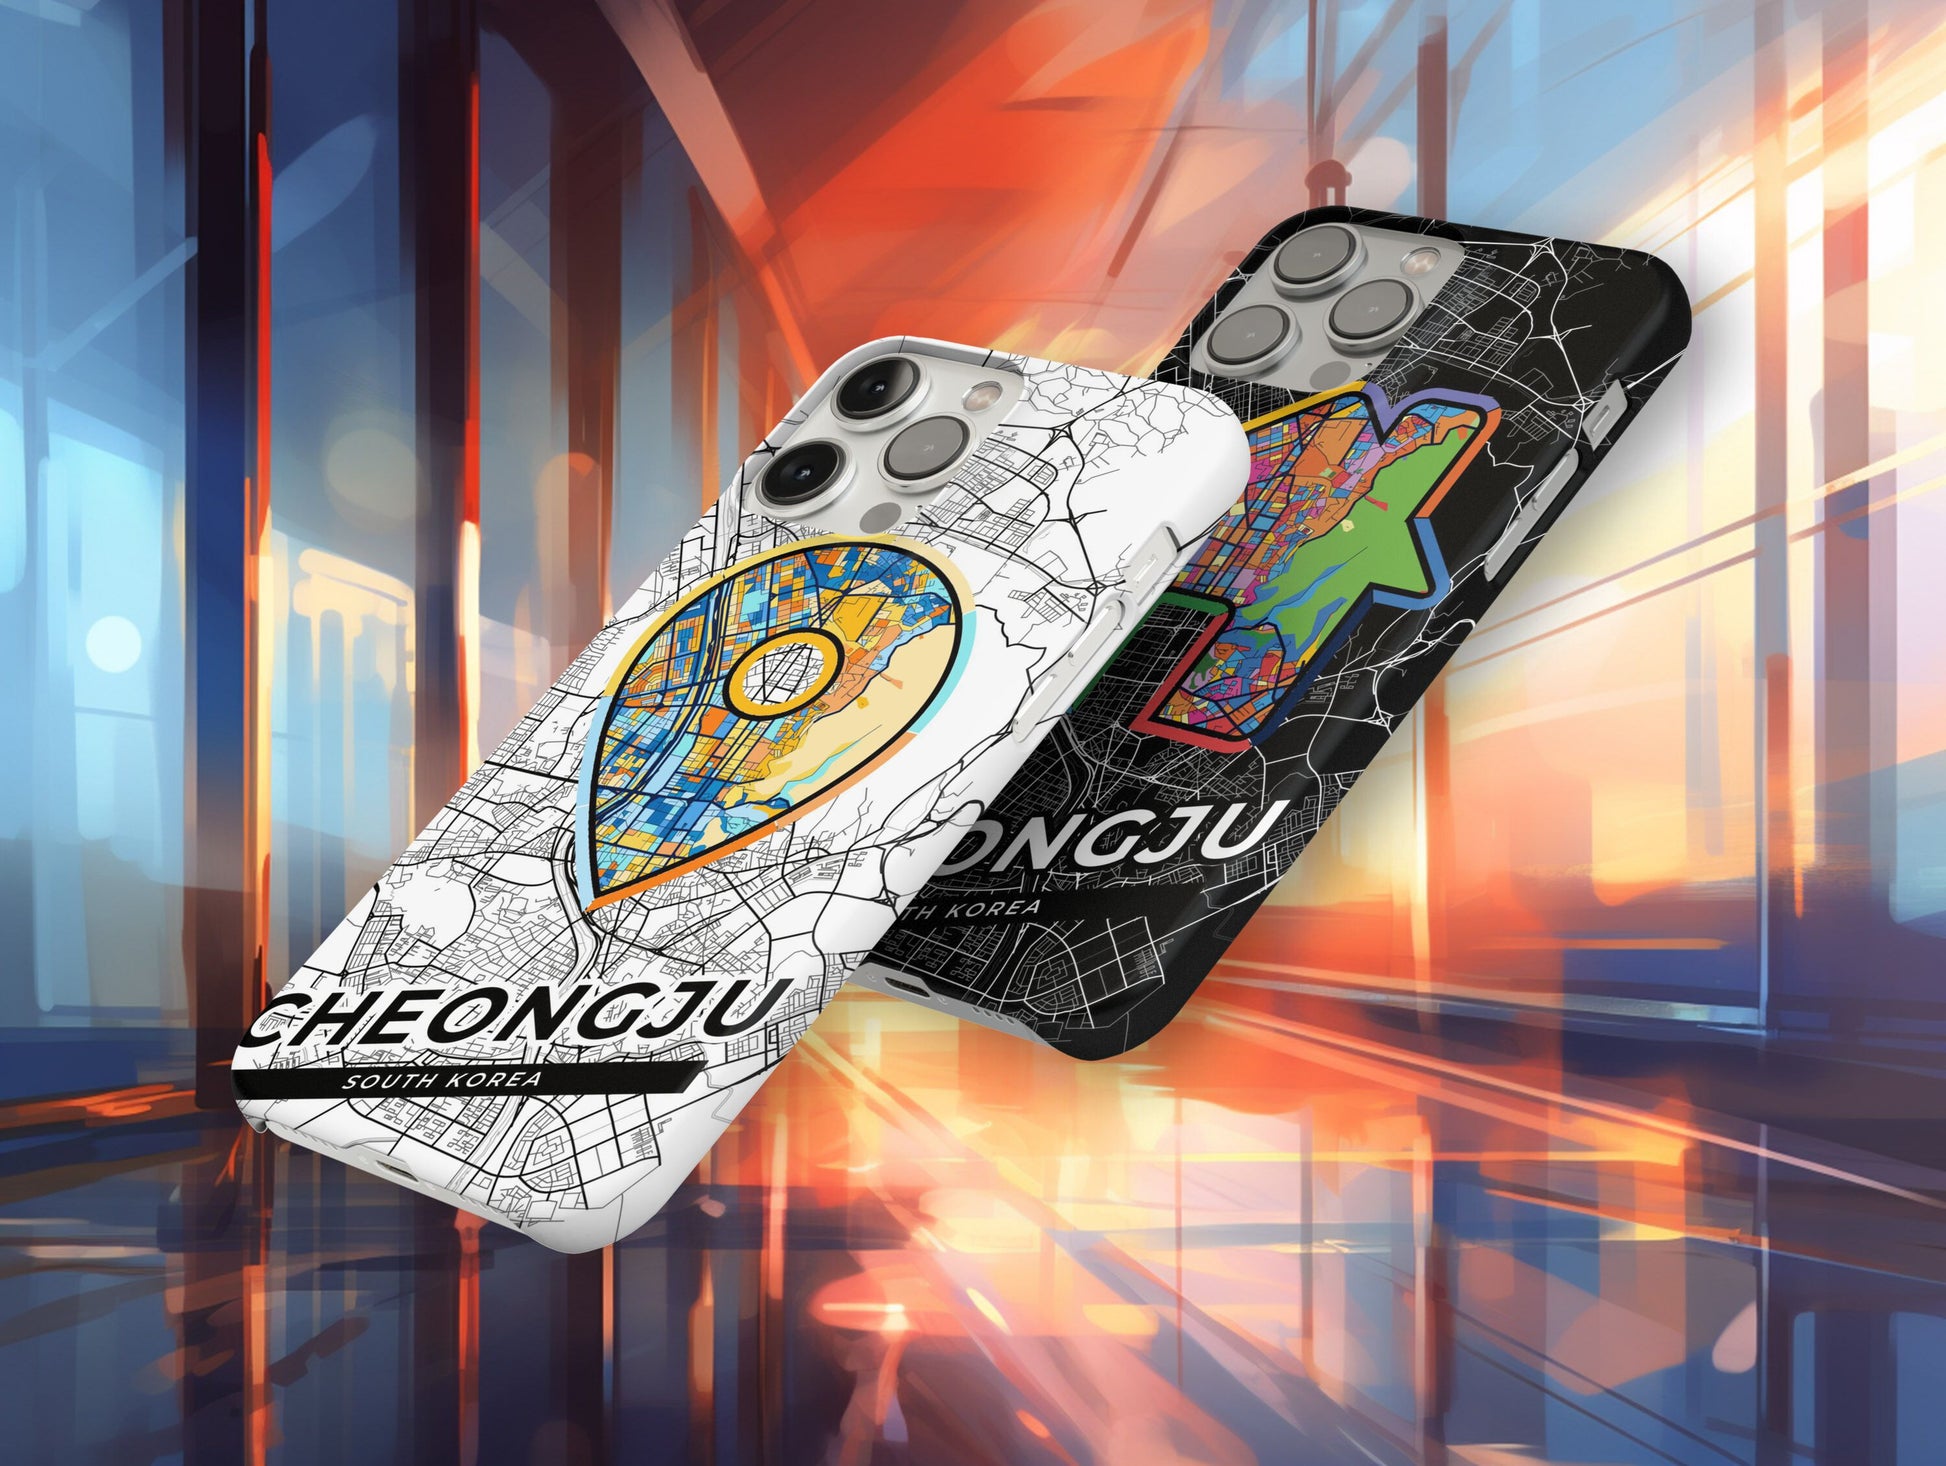 Cheongju South Korea slim phone case with colorful icon. Birthday, wedding or housewarming gift. Couple match cases.